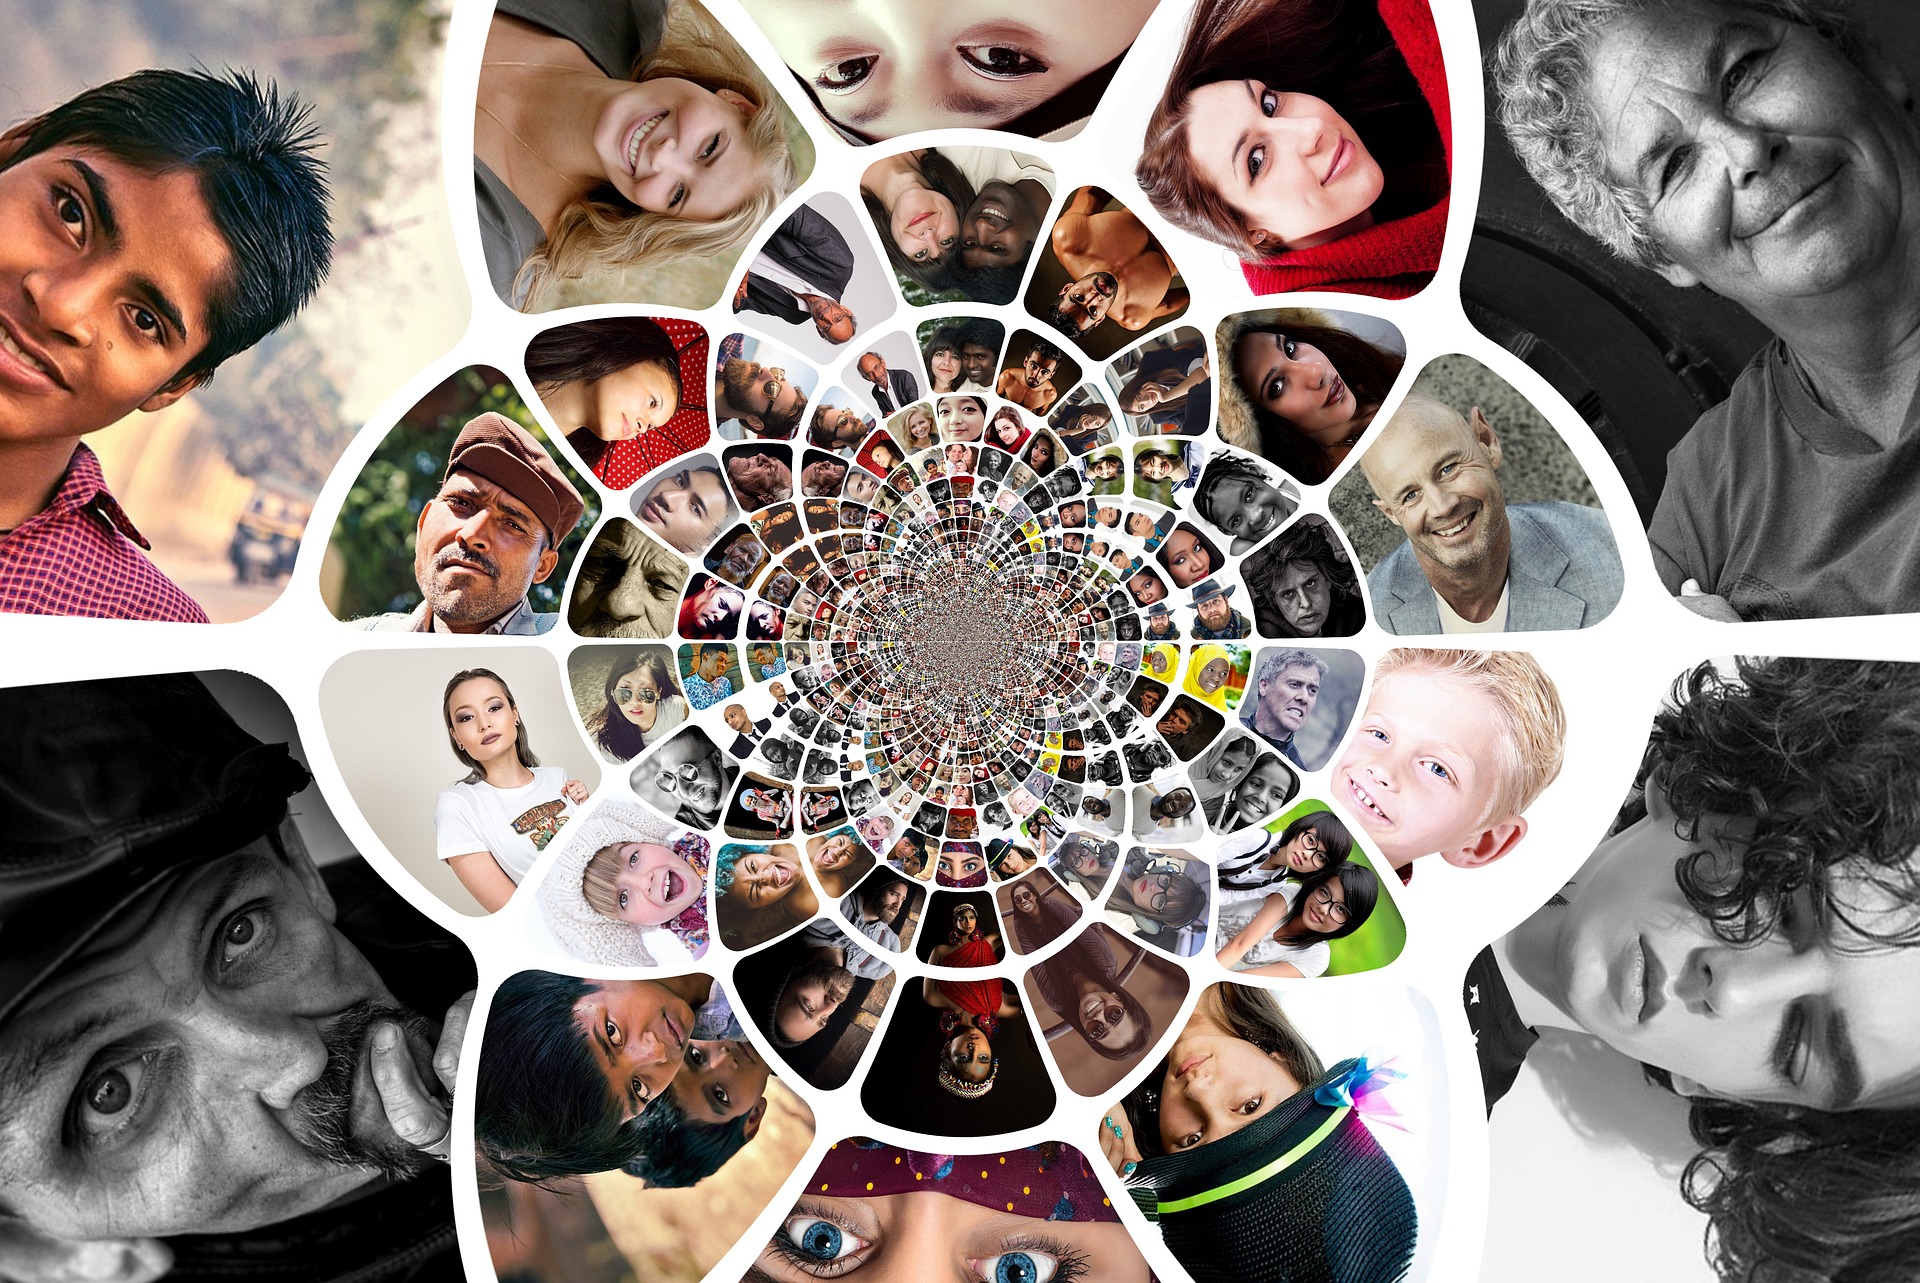 Kaleidoscope vision of images of different individuals